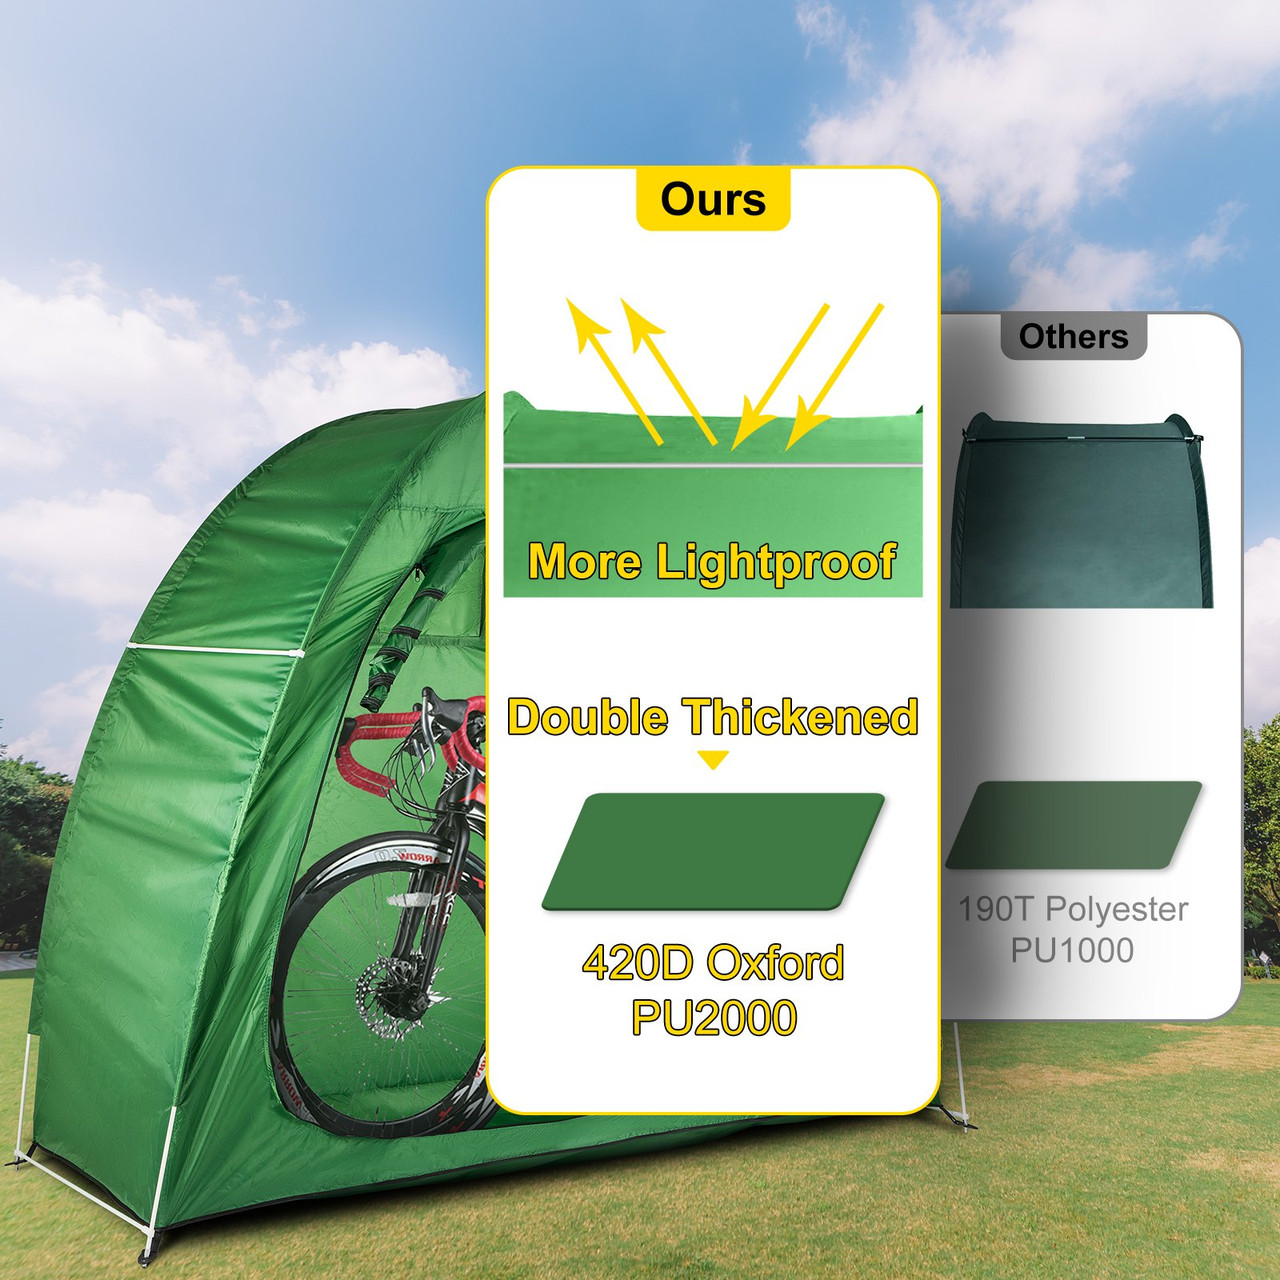 Bike Cover Storage Tent, 420D Oxford Portable for 2 Bikes, Outdoor Waterproof Anti-Dust Bicycle Storage Shed, Heavy Duty for Bikes, Lawn Mower, and Garden Tools, w/ Carry Bag and Pegs, Green